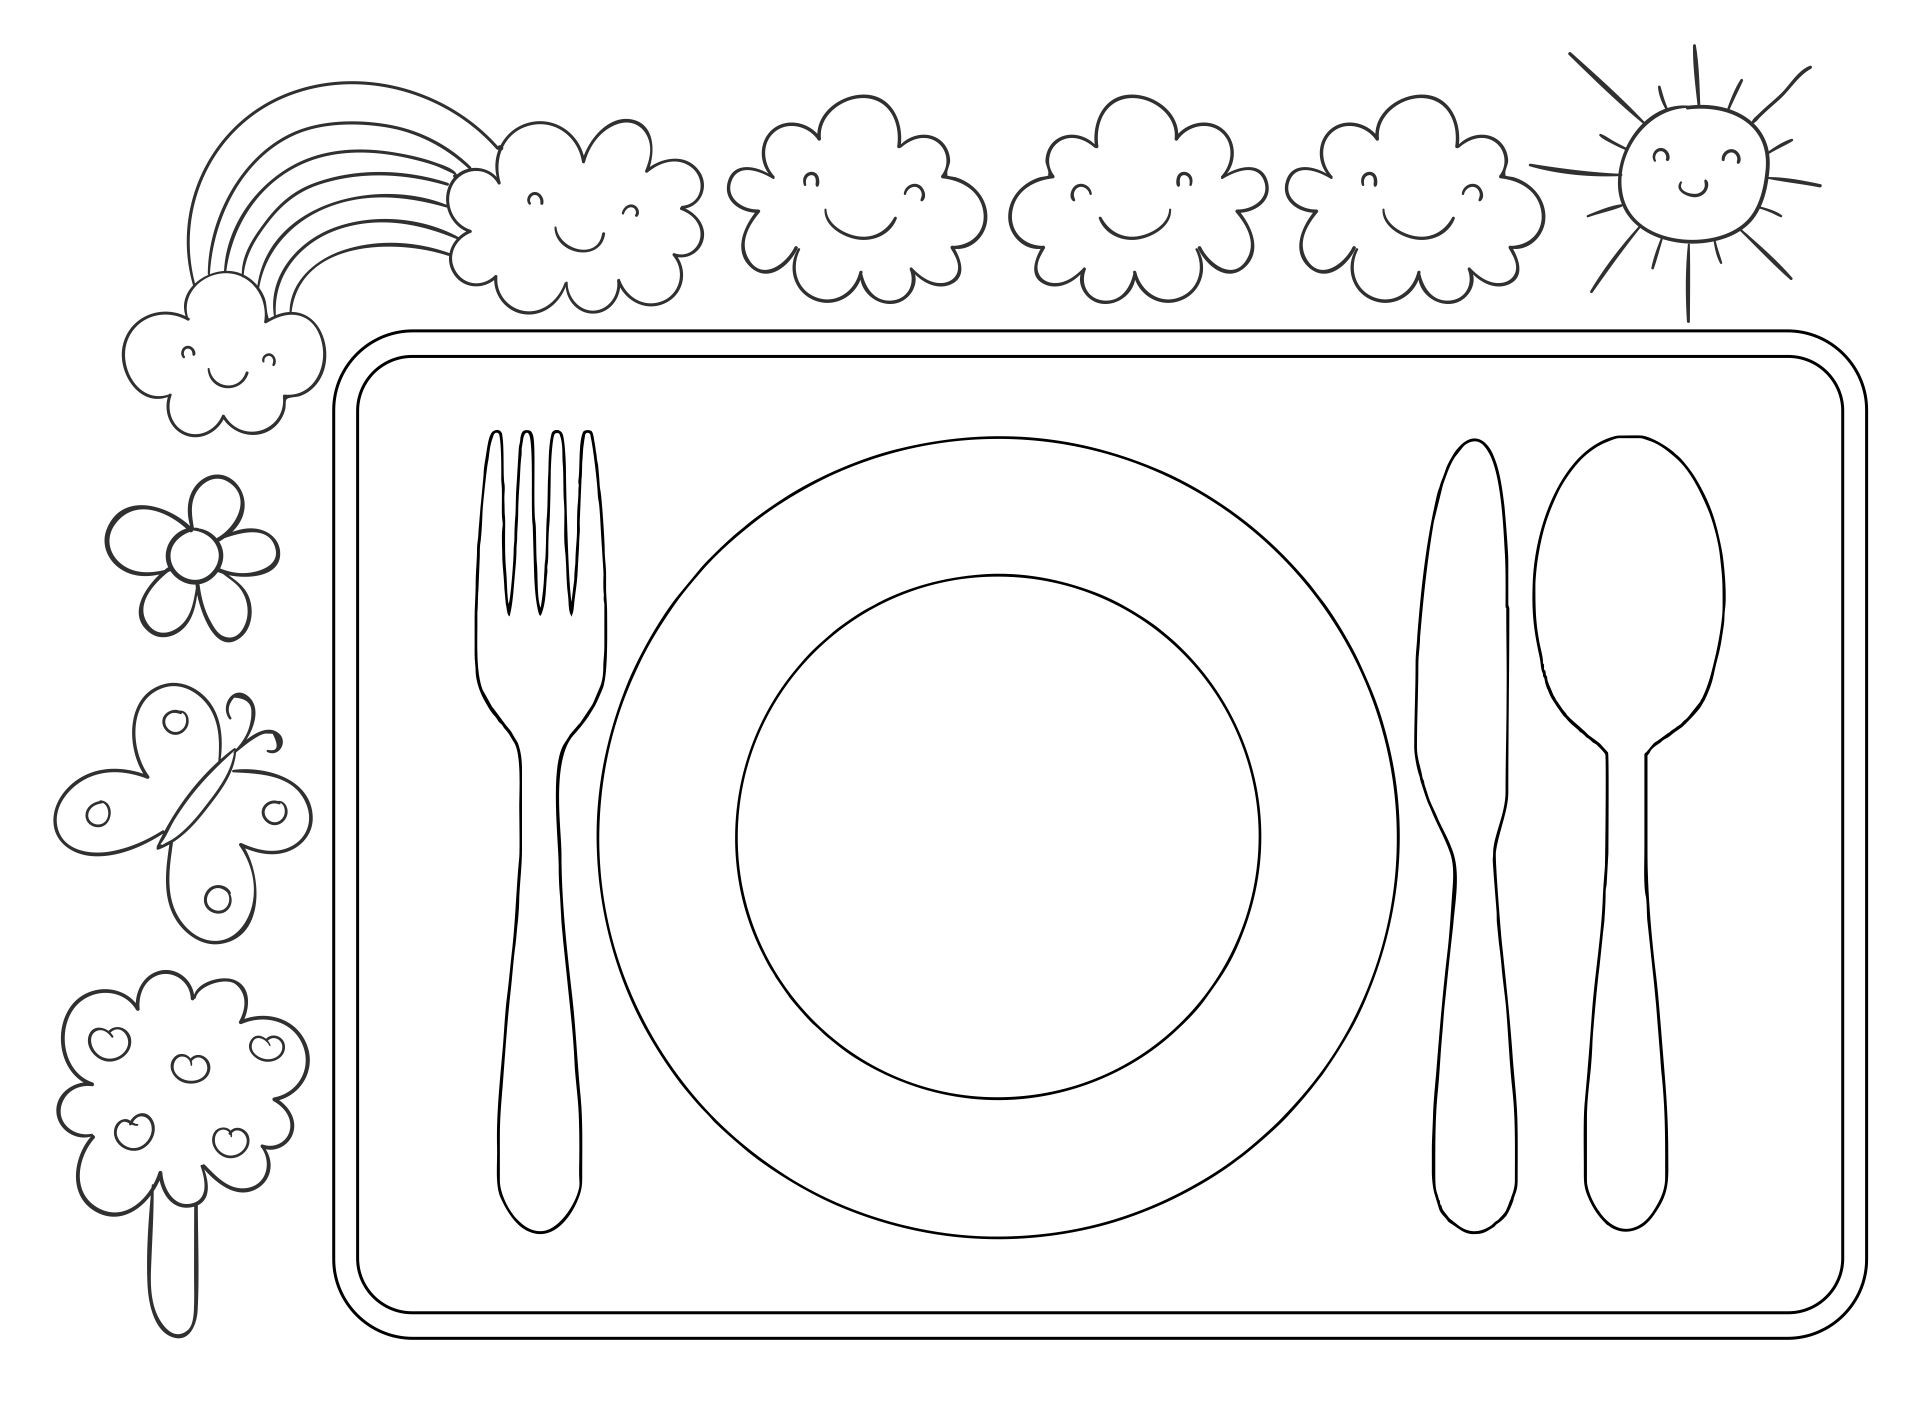 7 Best Images of Printable Placemats To Color Kids Placemat Template